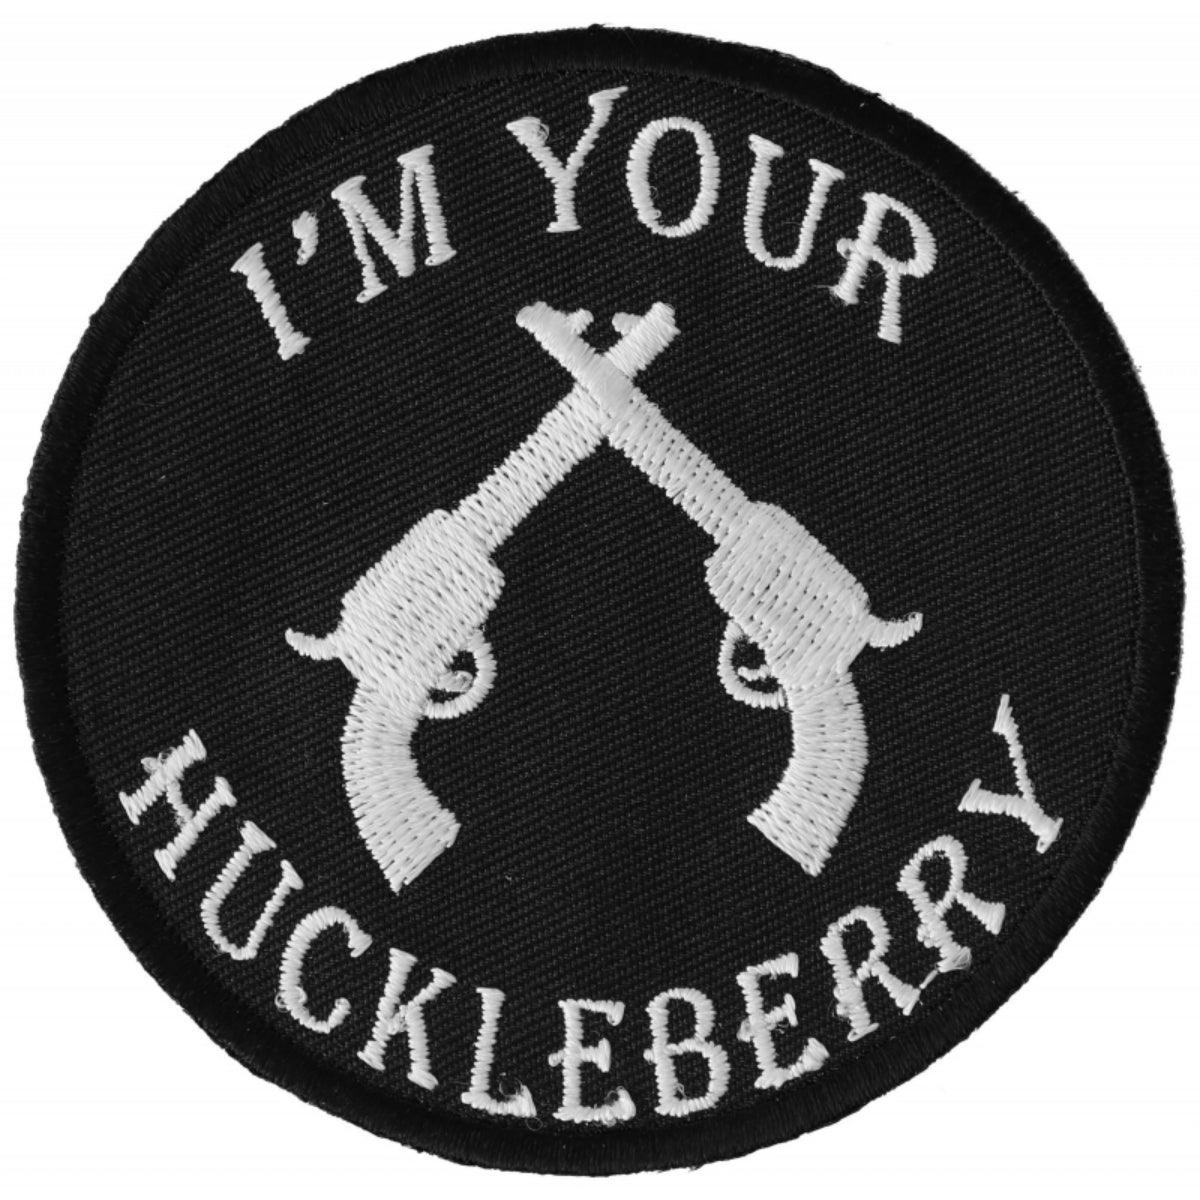 Daniel Smart I'm Your Huckleberry Pistols Iron on Novelty Embroidered Patch, 3 x 3 inches - American Legend Rider